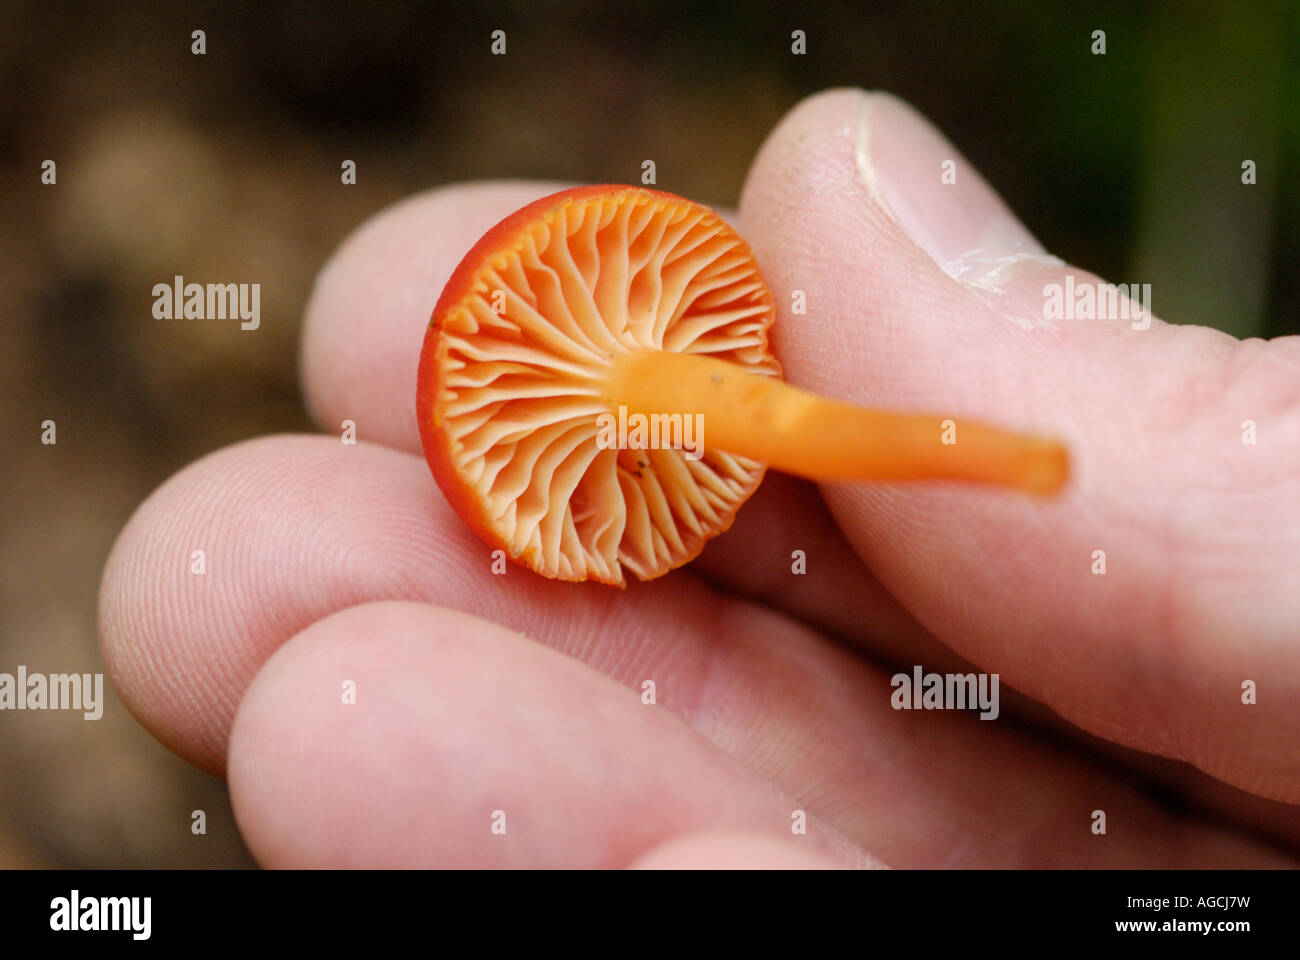 A person holding an orange mushroom Hygrophorus sp showing the gills on the underside of the cap Stock Photo